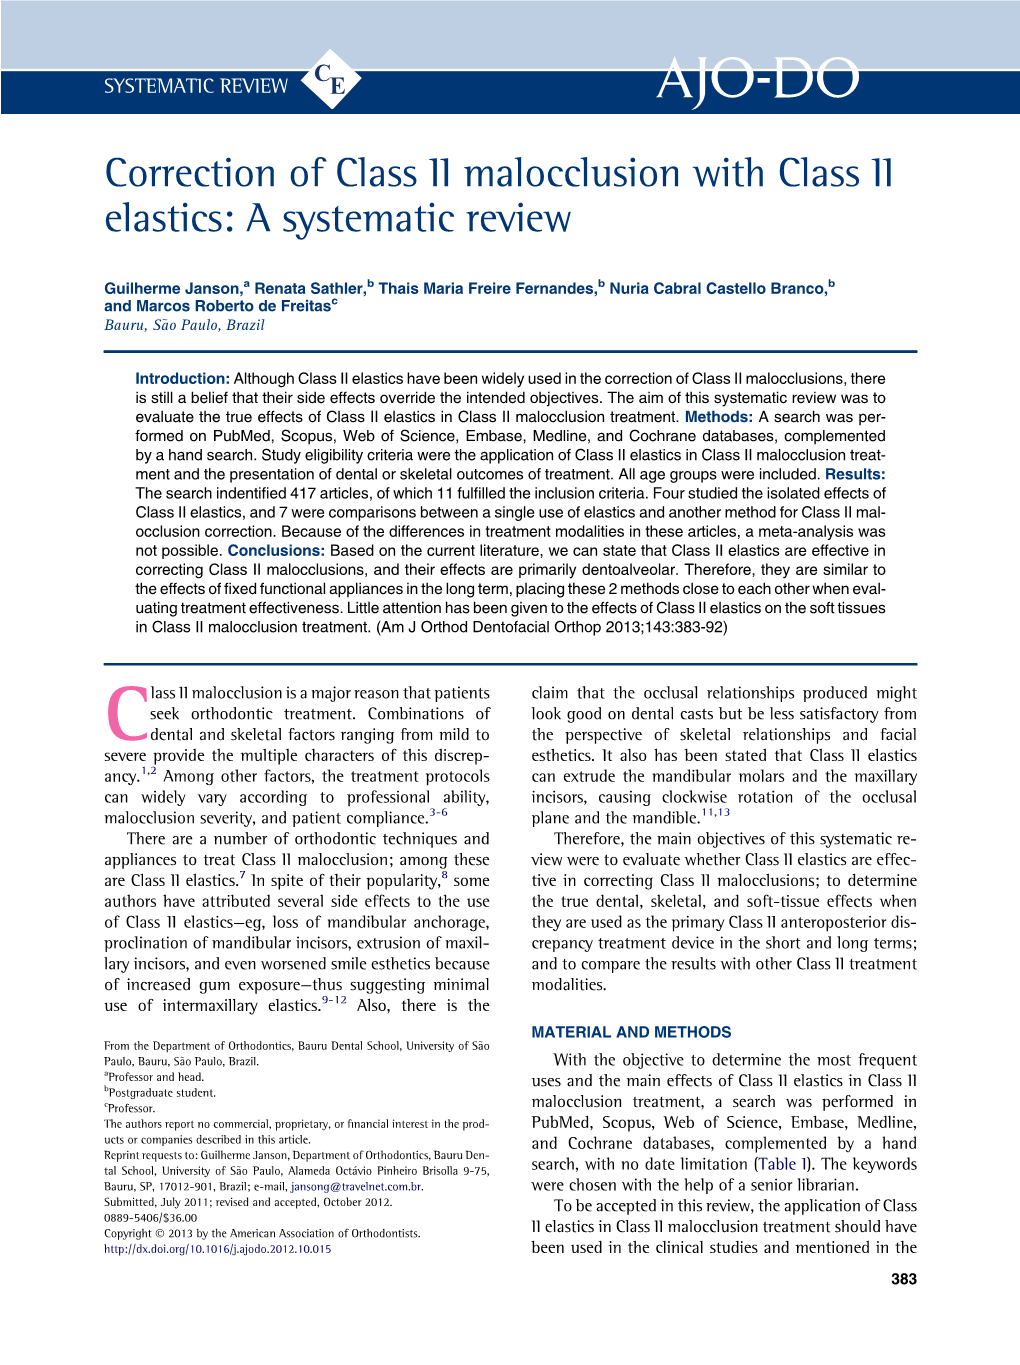 Correction of Class II Malocclusion with Class II Elastics: a Systematic Review